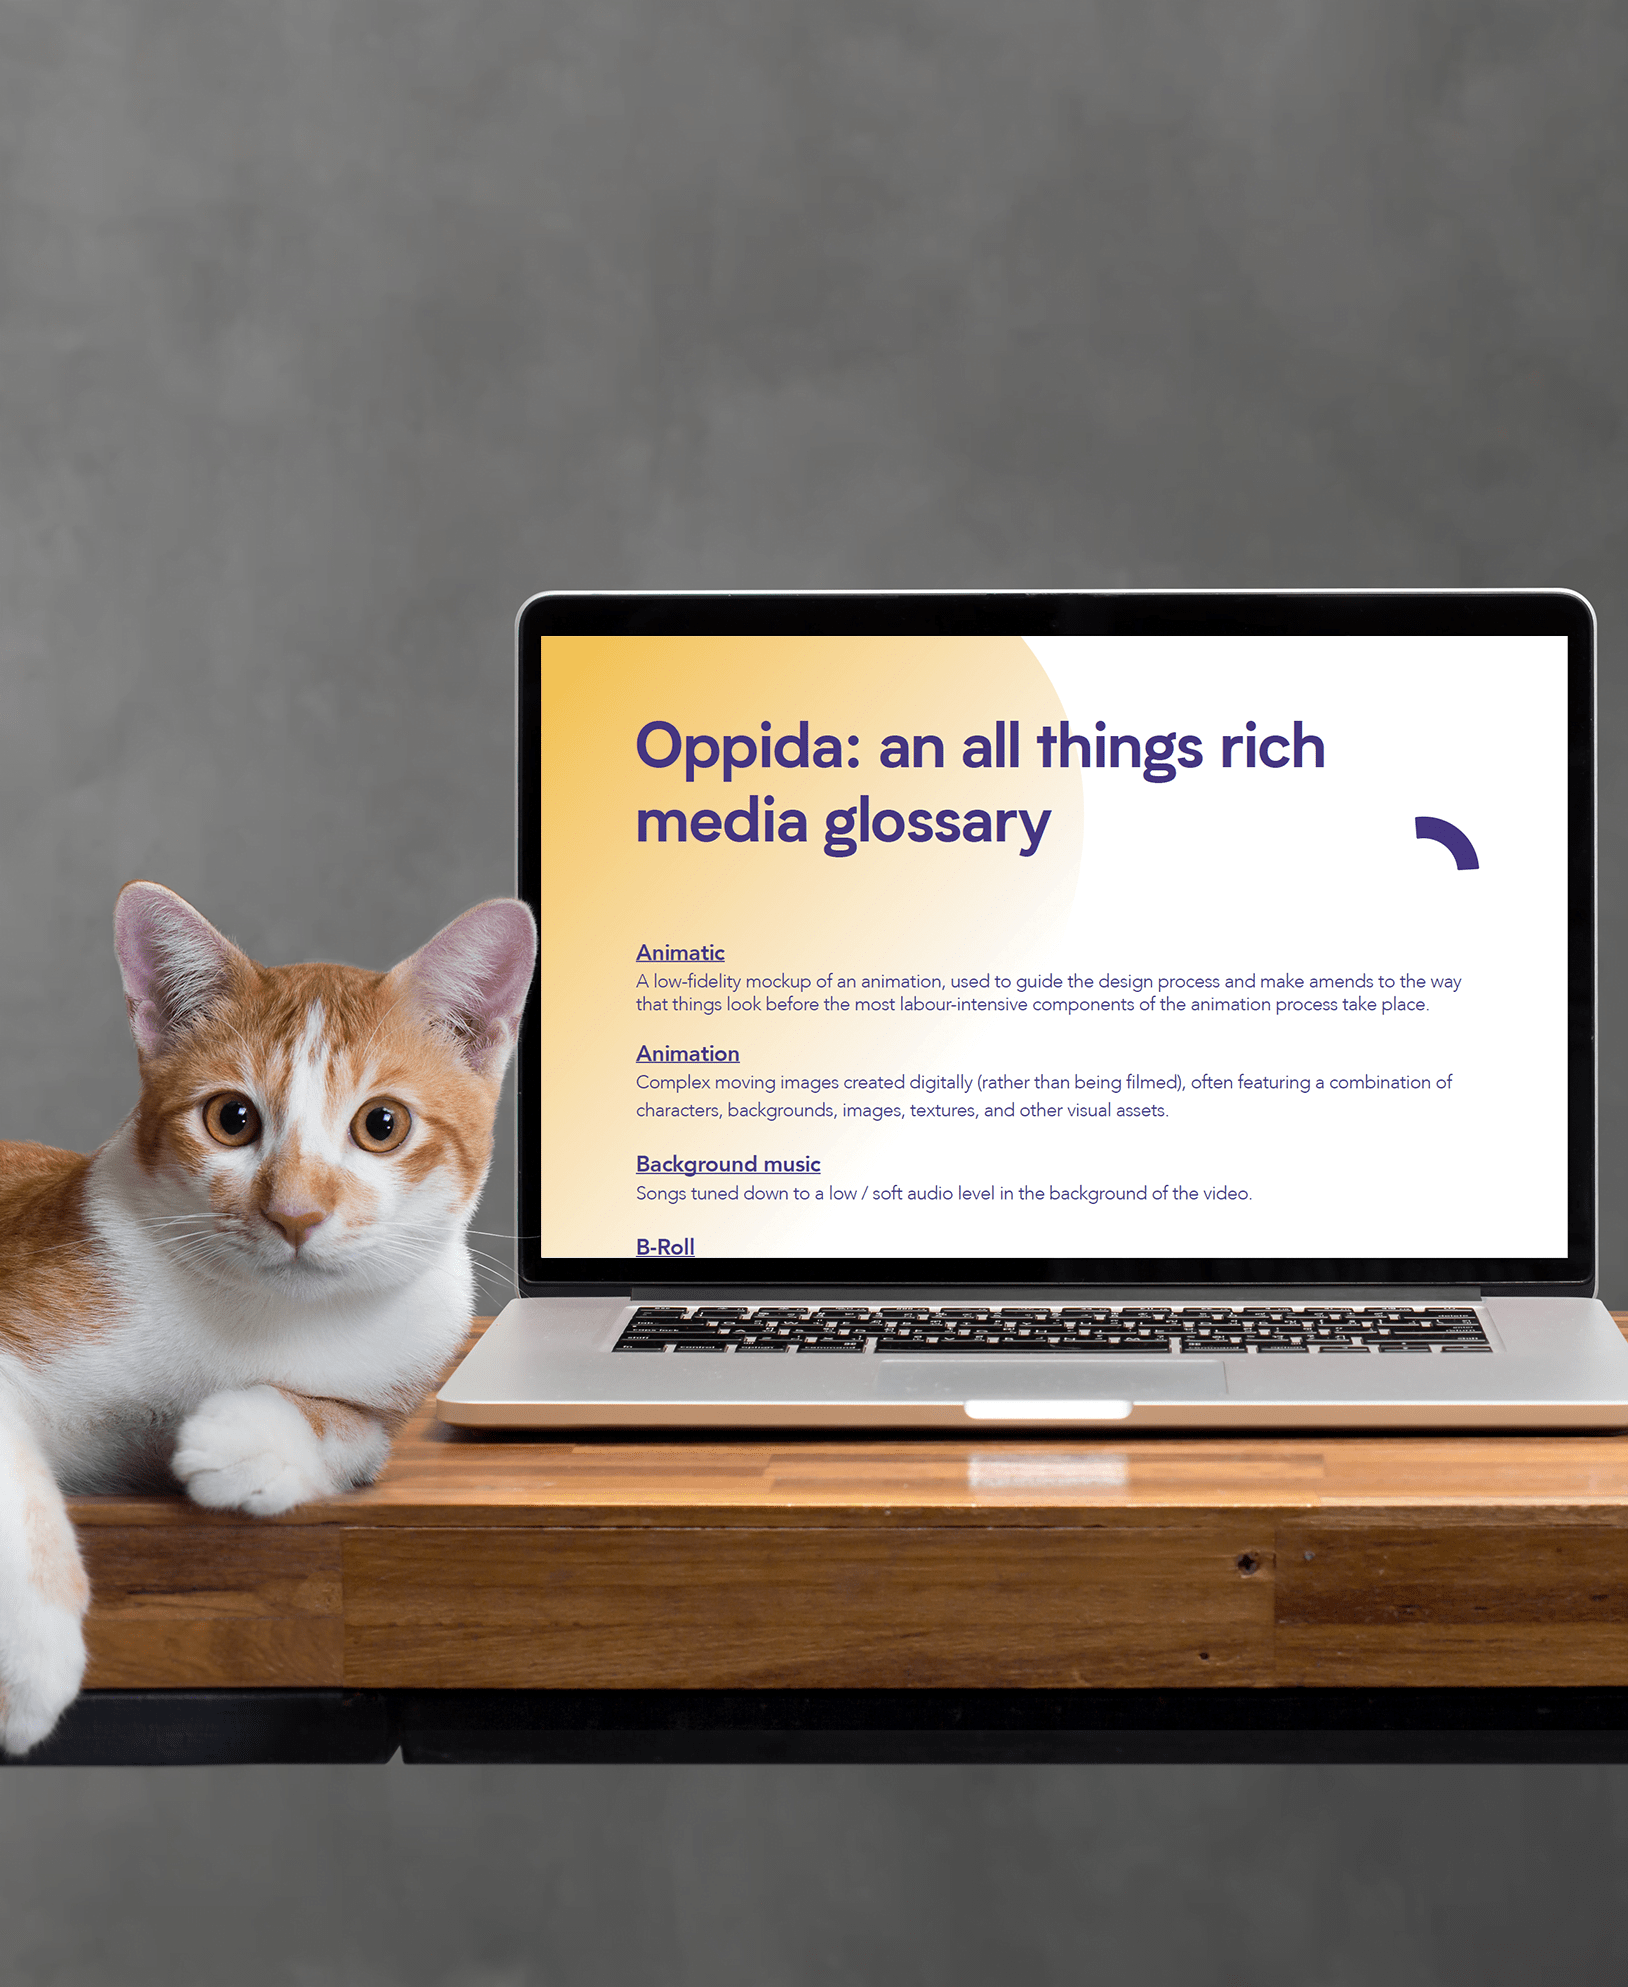 Oppida-an-all-things-rich-media-glossary